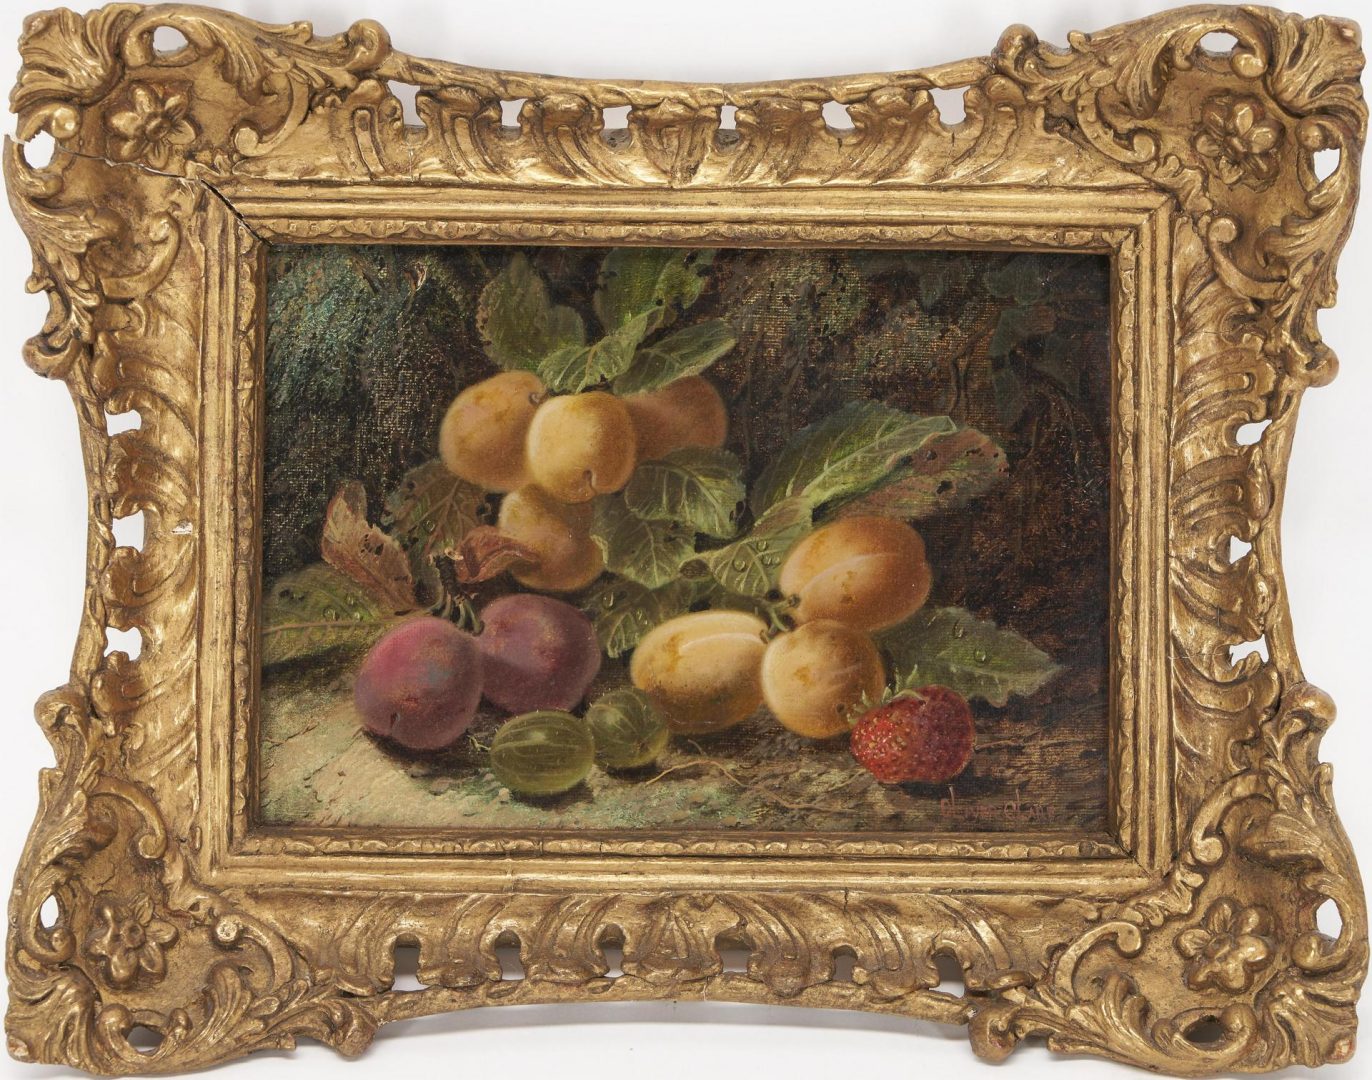 Lot 264: 2 Oliver Clare Oil Still Life Painting w/ Fruit